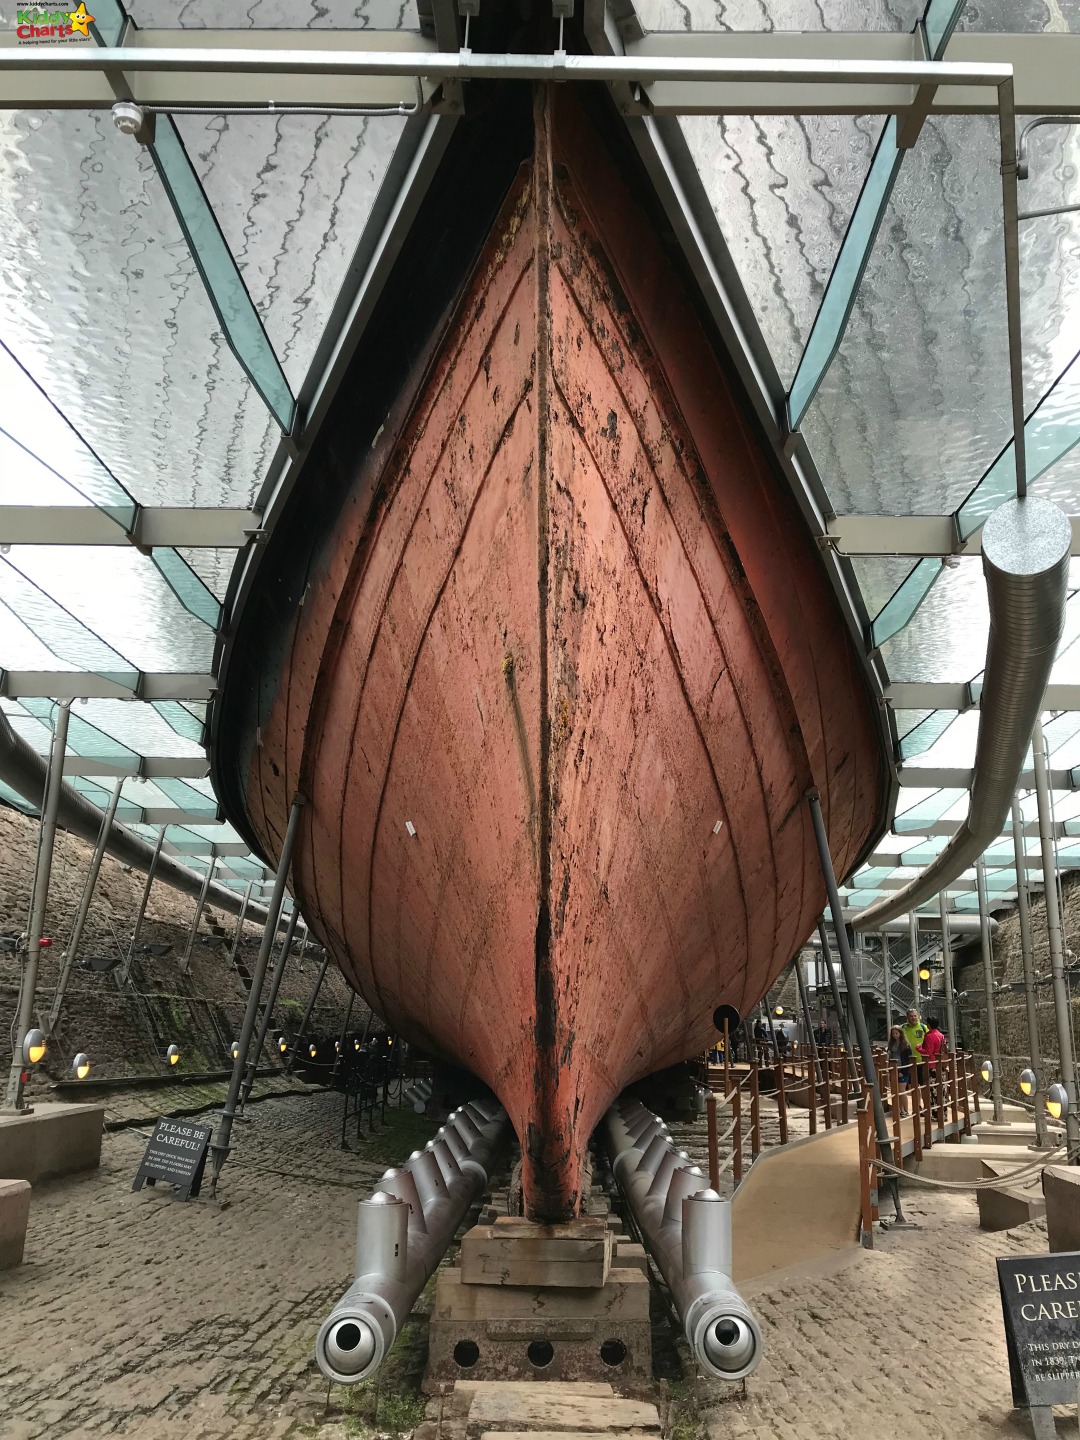 SS Great Britain in the Dry Docks #daysout #travel #uk #bristol